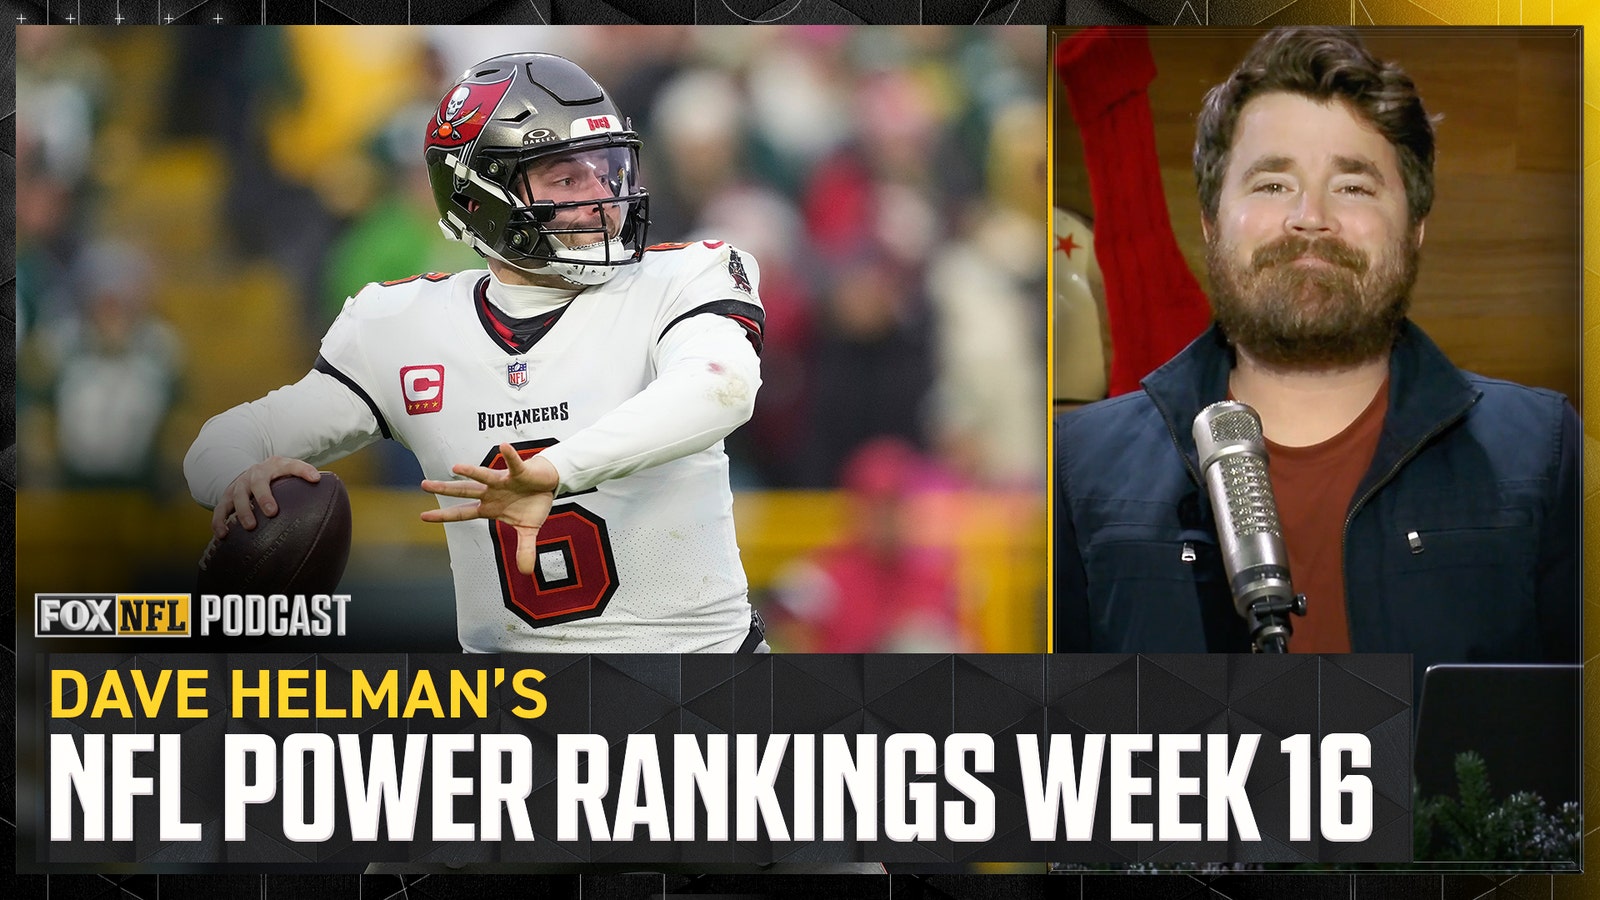 With Week 16 right around the corner, Dave Helman reveals his updated NFL power rankings